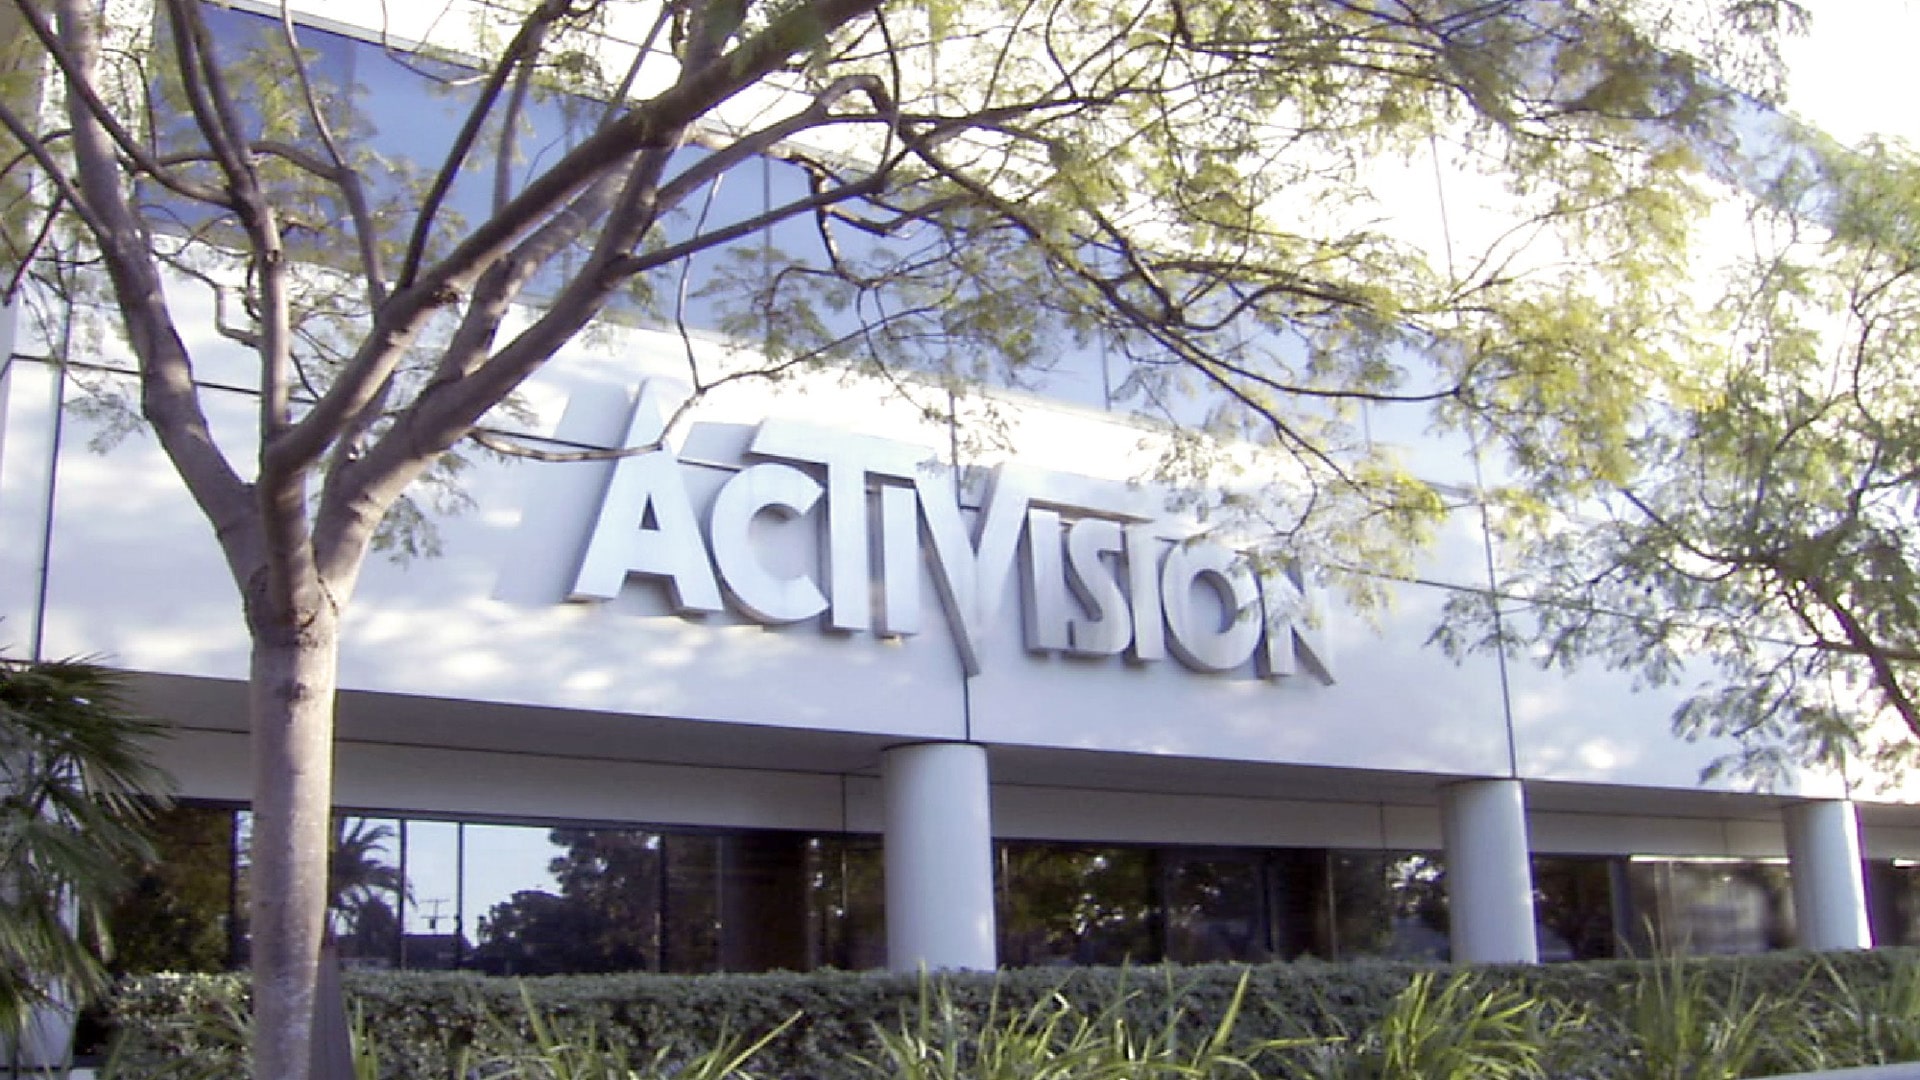 Exterior view of the Activision Blizzard corporate office building.